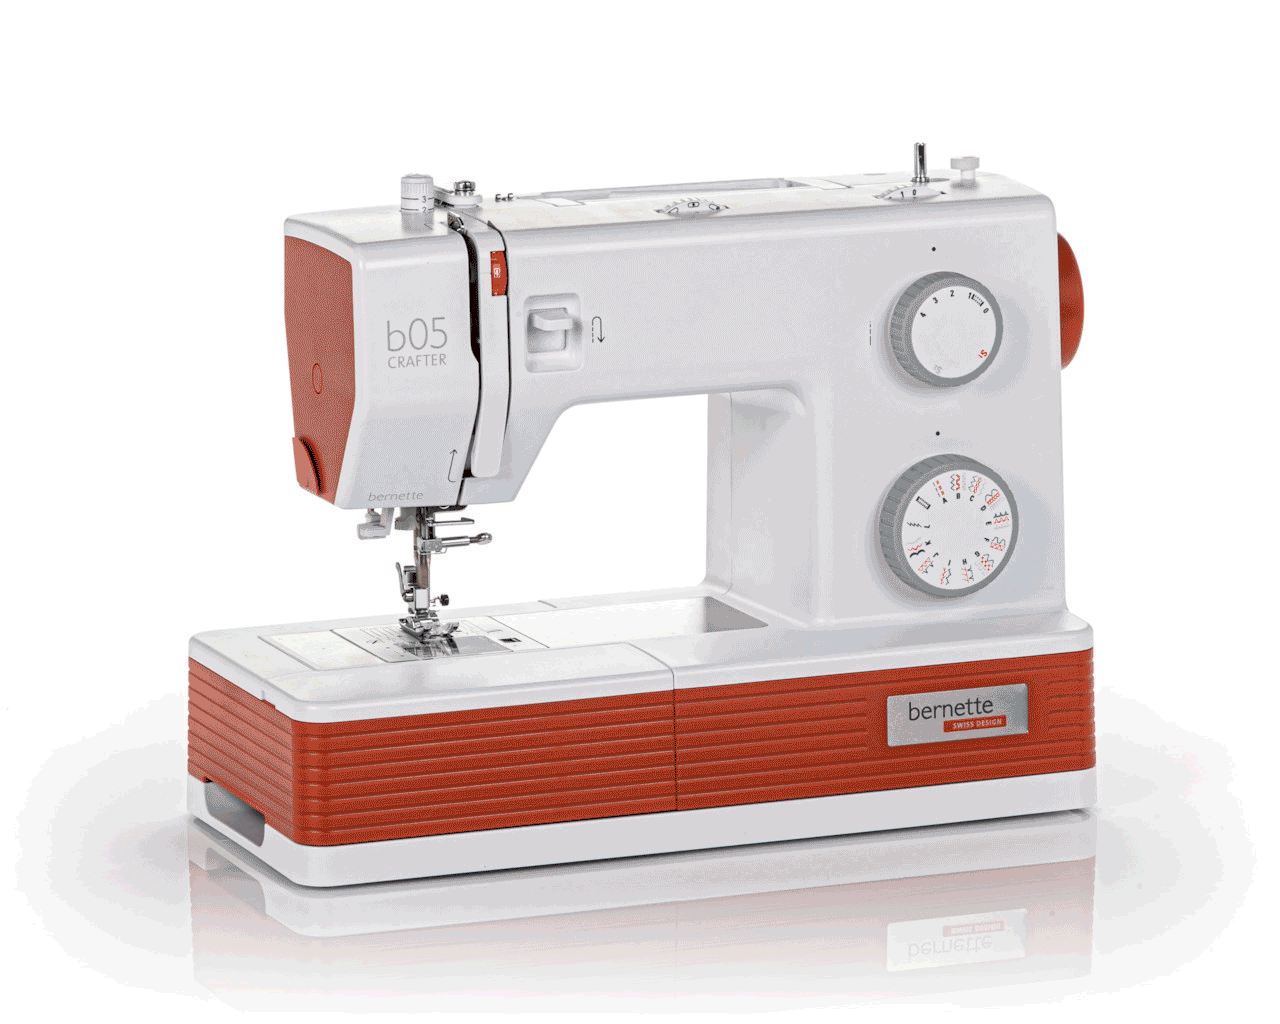 spinning 3d image of the Bernette b05 Crafter Sewing Machine